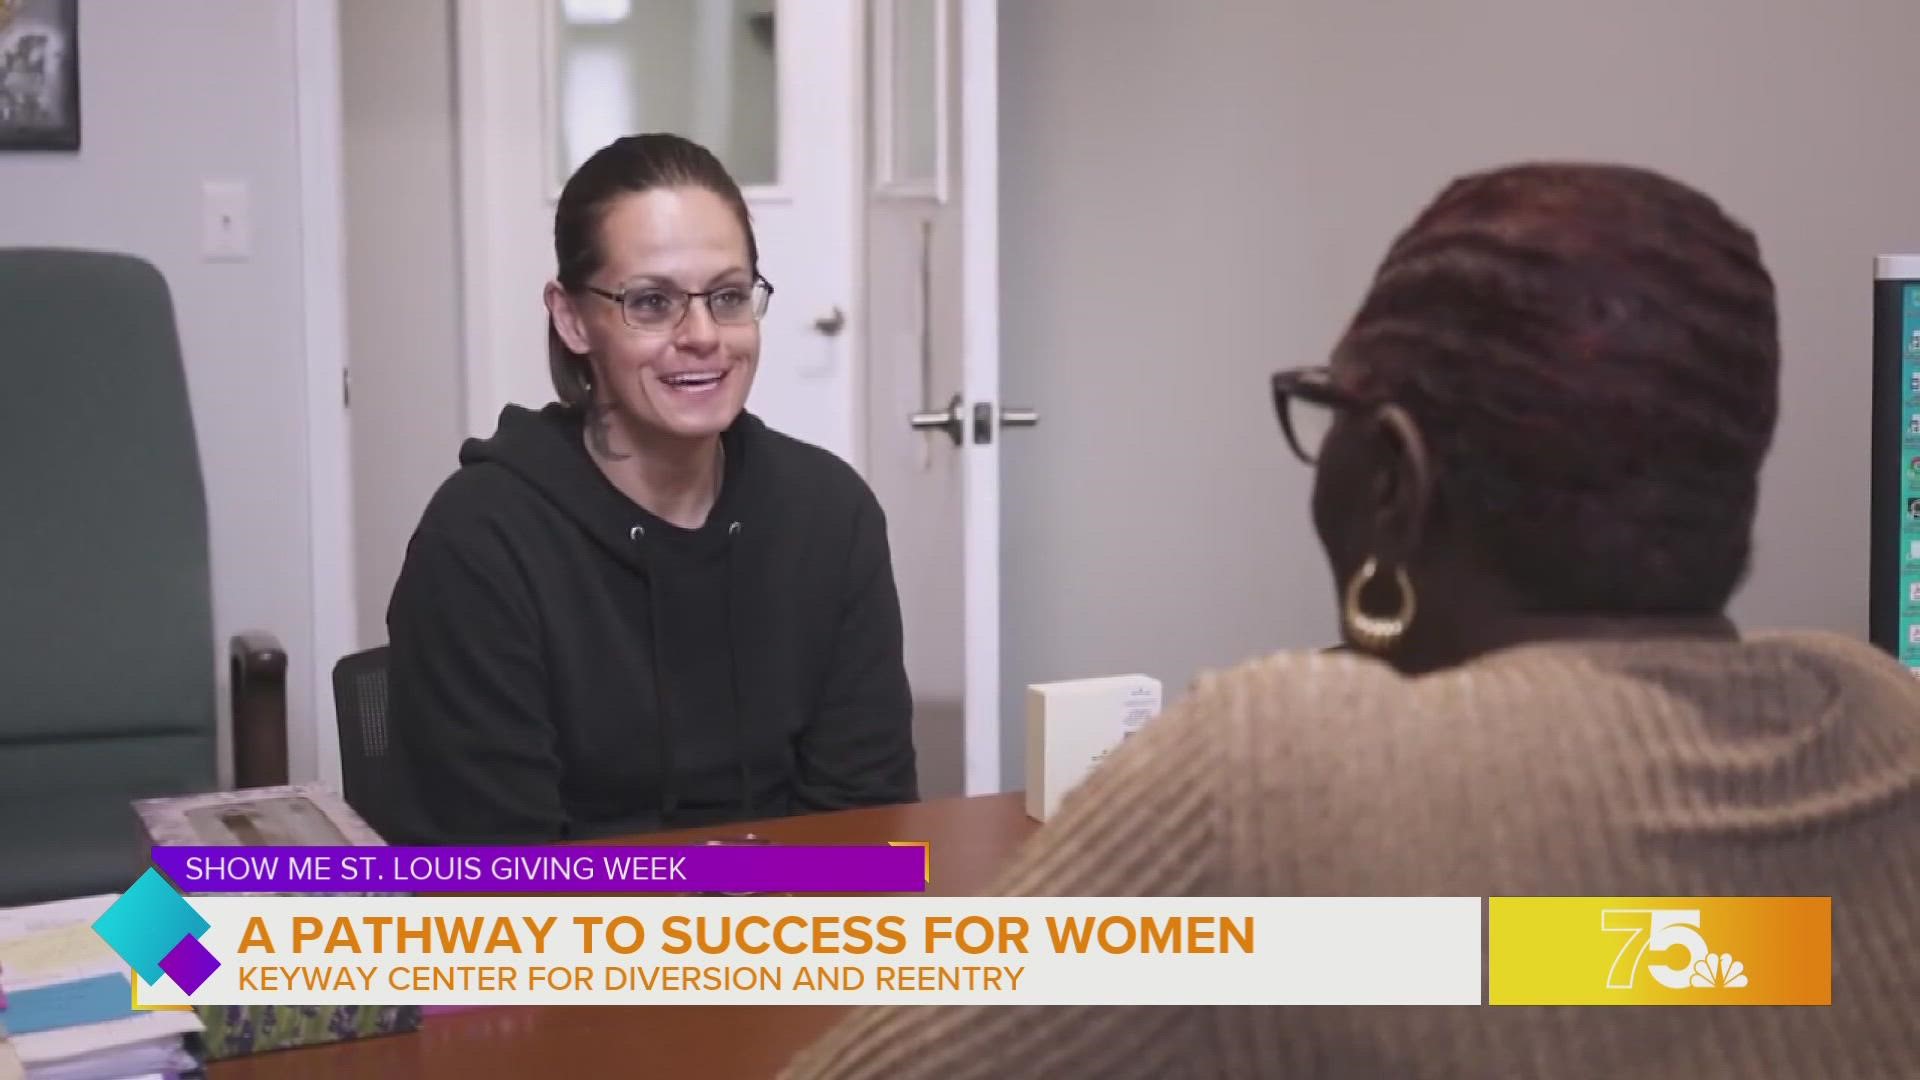 Keyway Center for Diversion and Reentry helps women returning from prison and jail by providing a pathway to success in their lives and in their community.